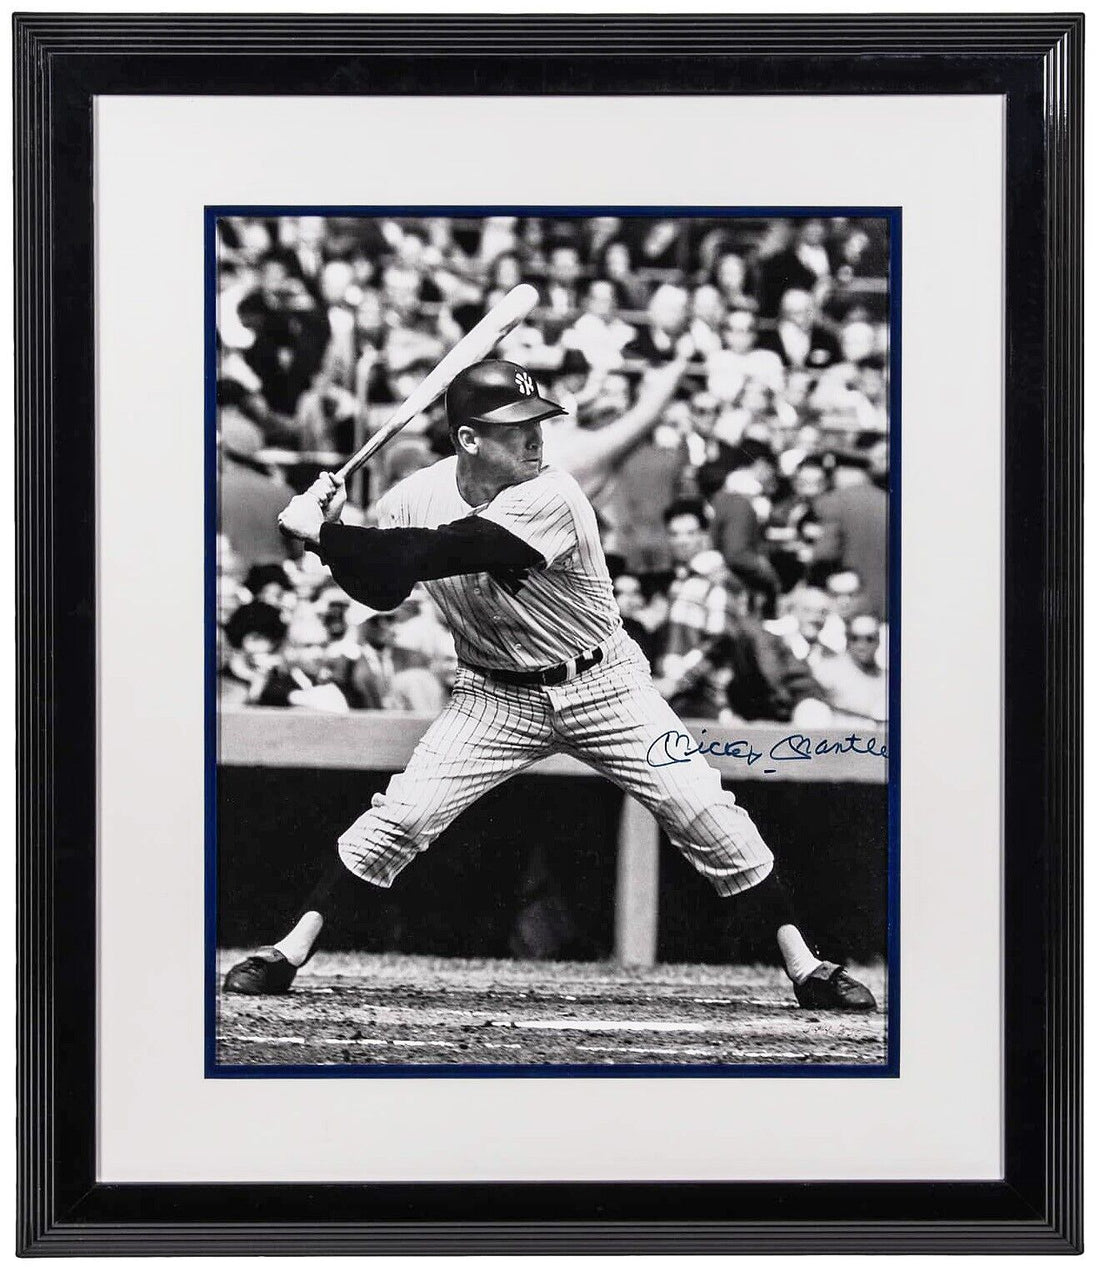 Mickey Mantle Signed 16x20 Photo, New York Yankees Limited Edition 536. Auto PSA